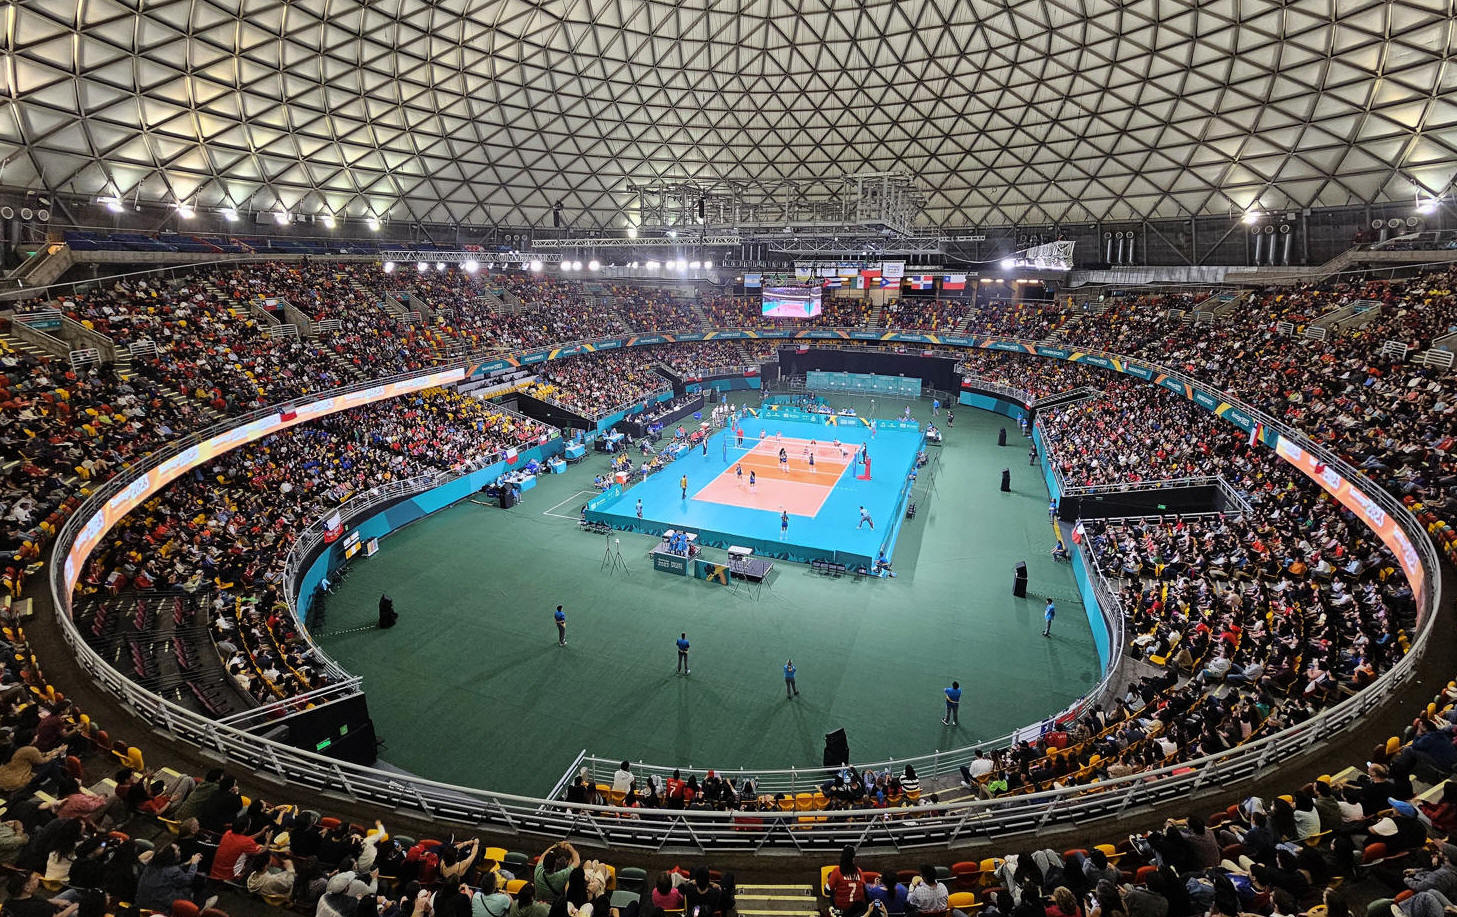 It’s the turn for Men’s Volleyball at Santiago 2023 Pan American Games